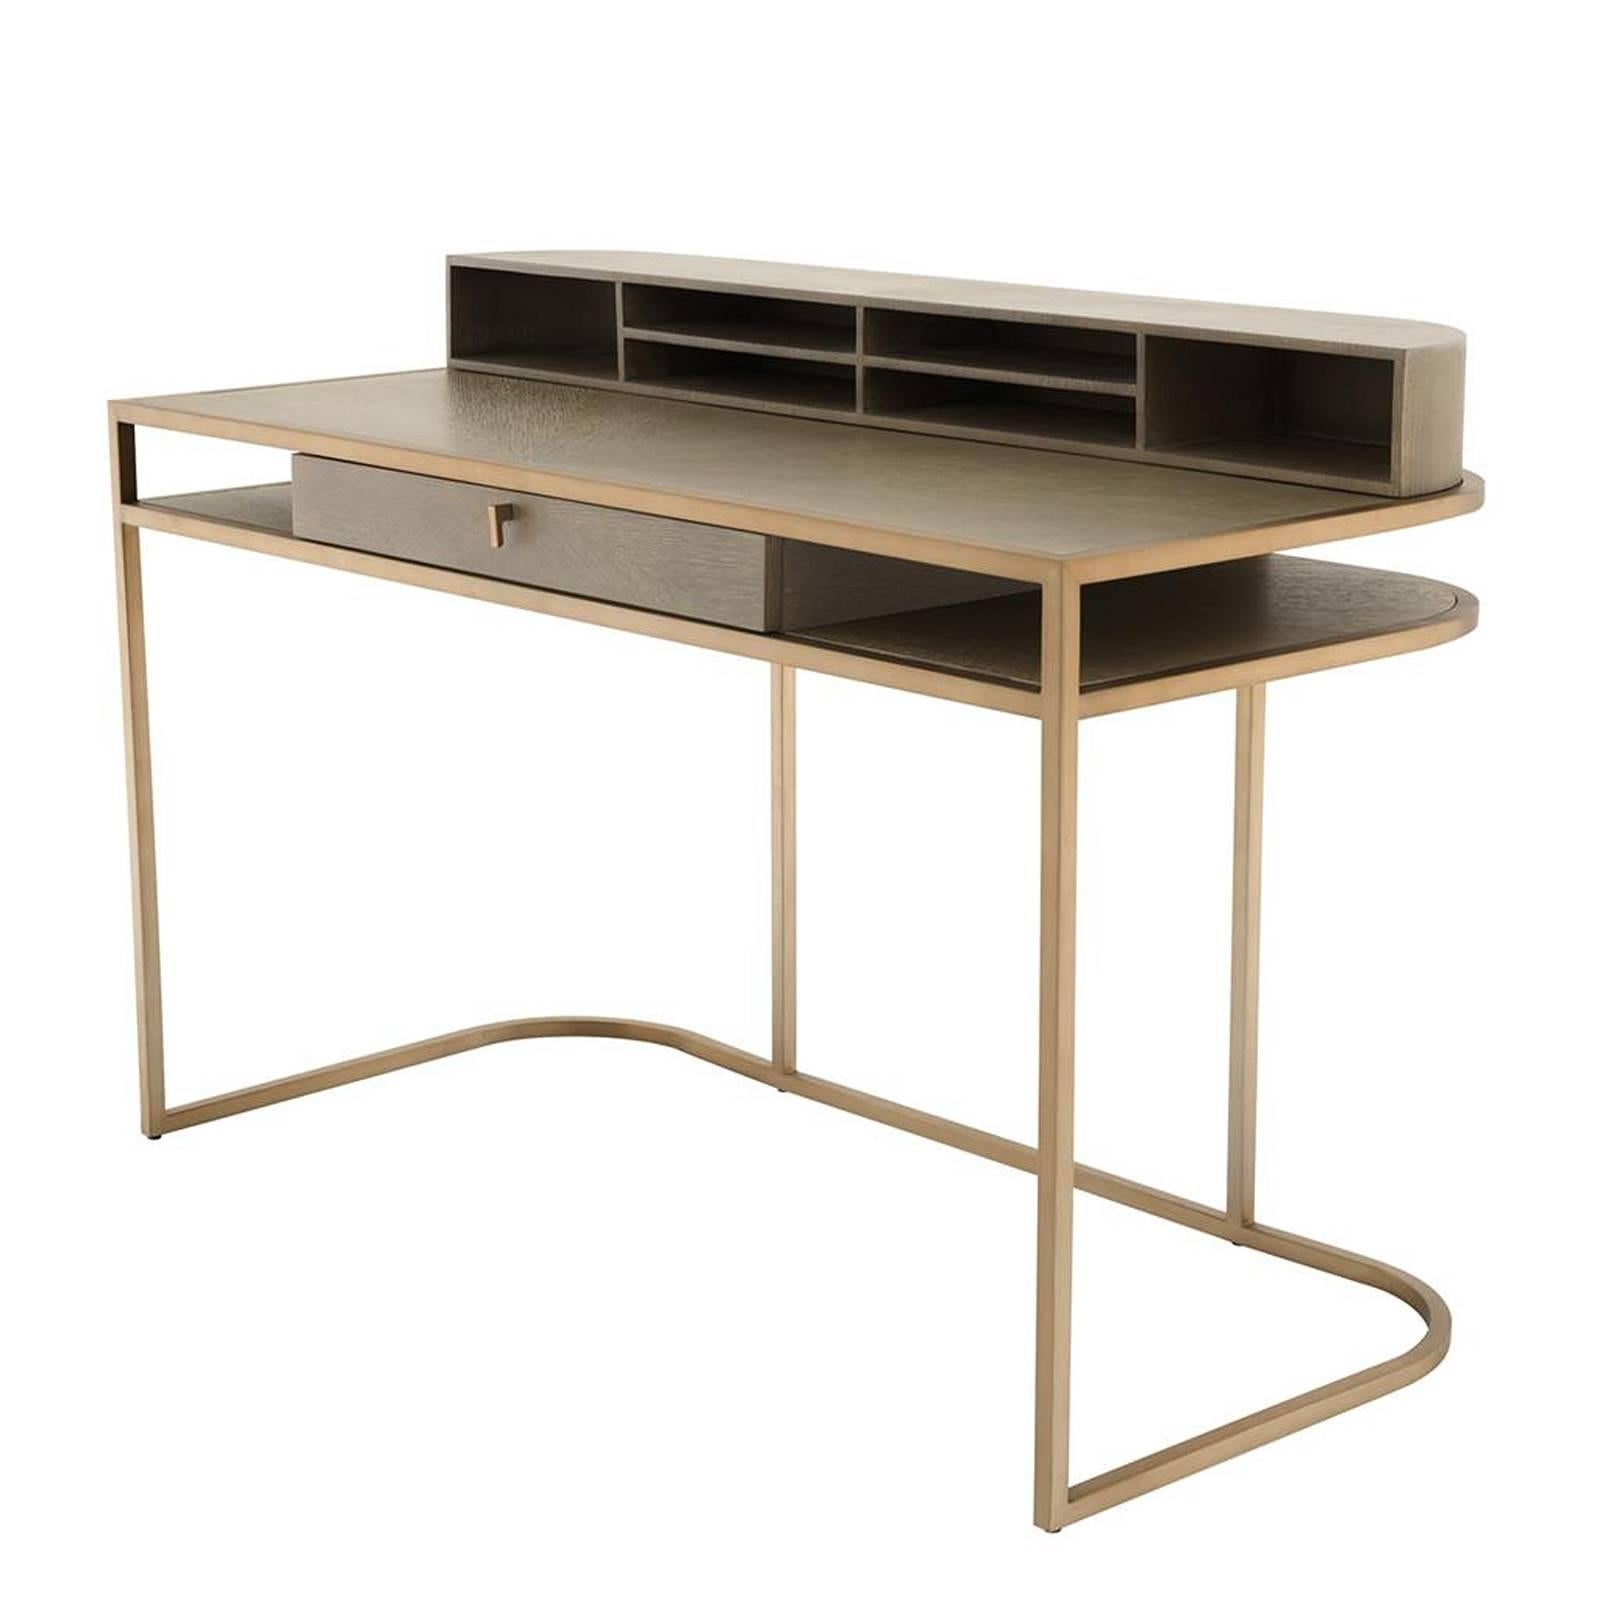 Catalaga Desk in Washed Oak Veneer and Brass